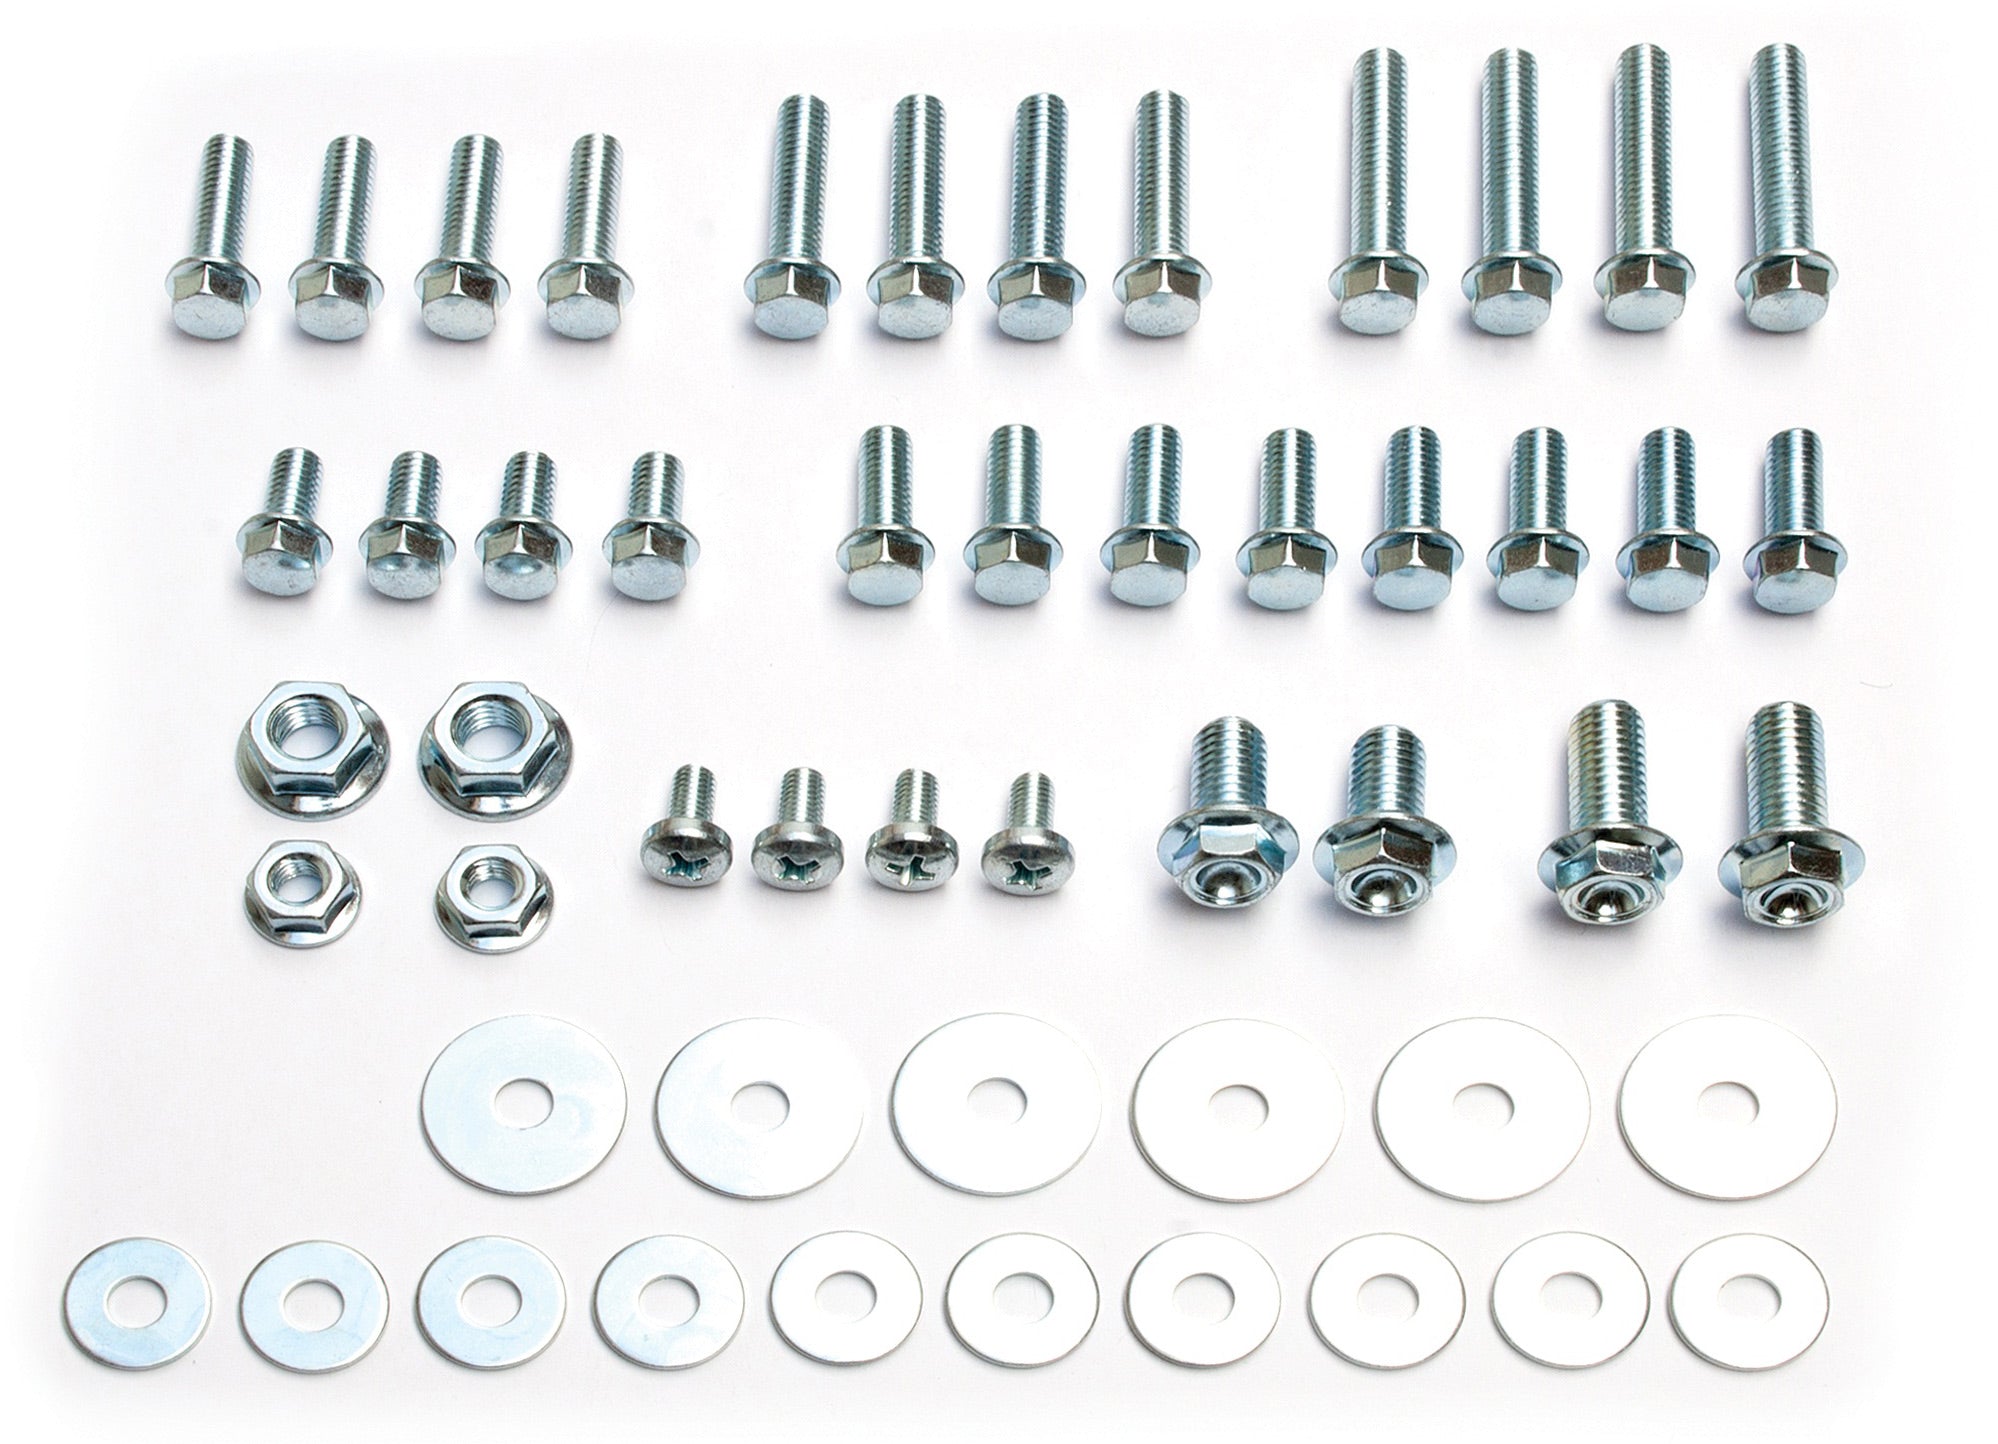 Metric hardware kit 52 pieces including screws, nuts, and washers